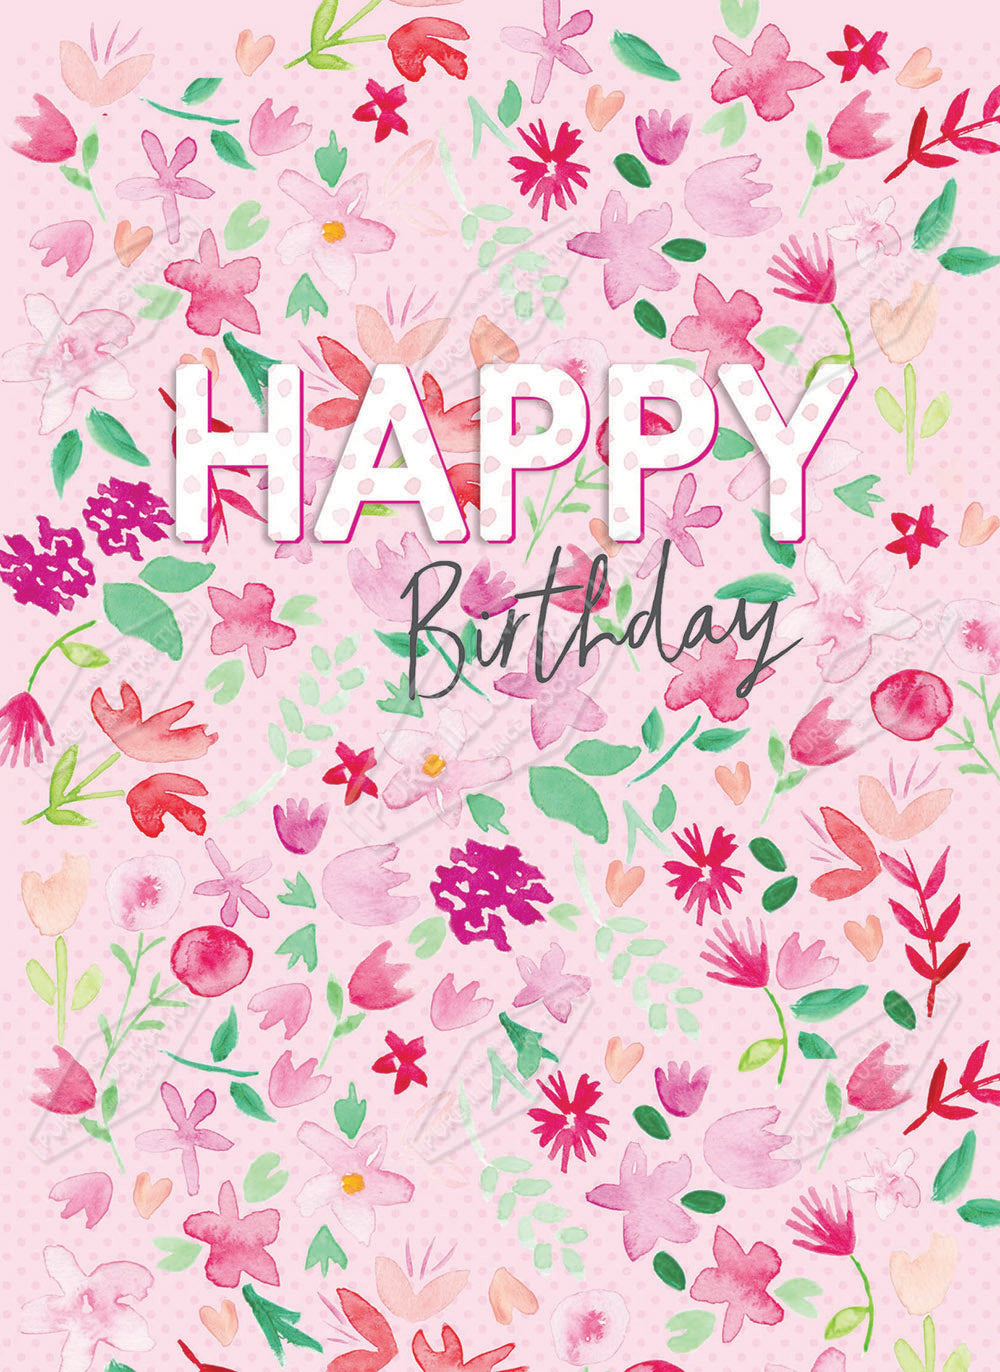 00032476SLA- Sarah Lake is represented by Pure Art Licensing Agency - Birthday Greeting Card Design